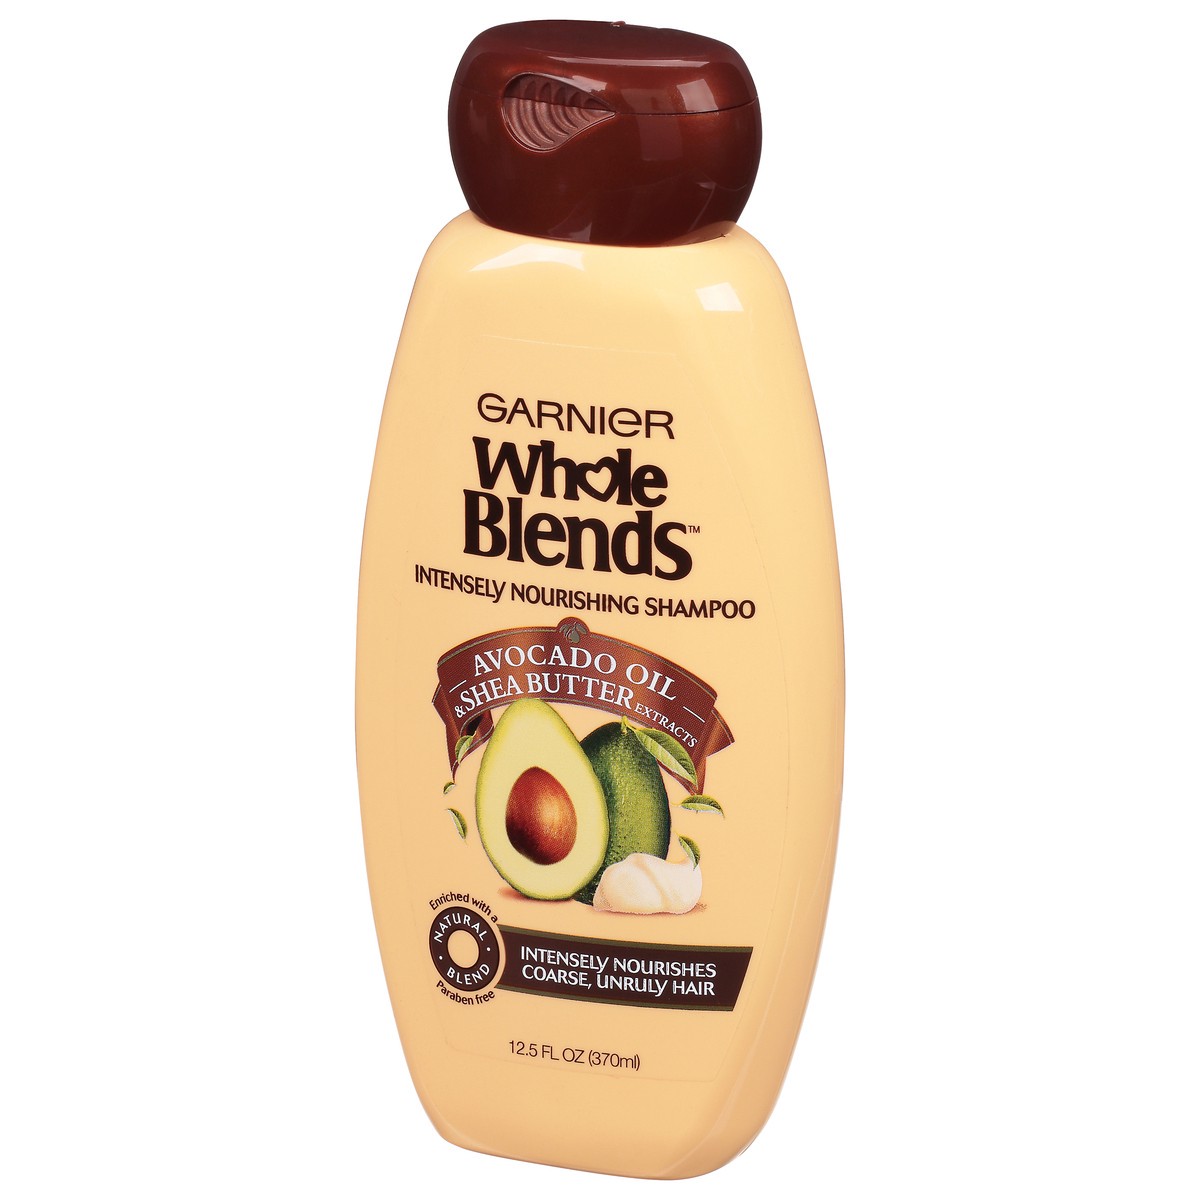 slide 8 of 10, Whole Blends Intensely Nourishing Avocado Oil & Shea Butter Extracts Shampoo 12.5 fl oz, 12.5 fl oz